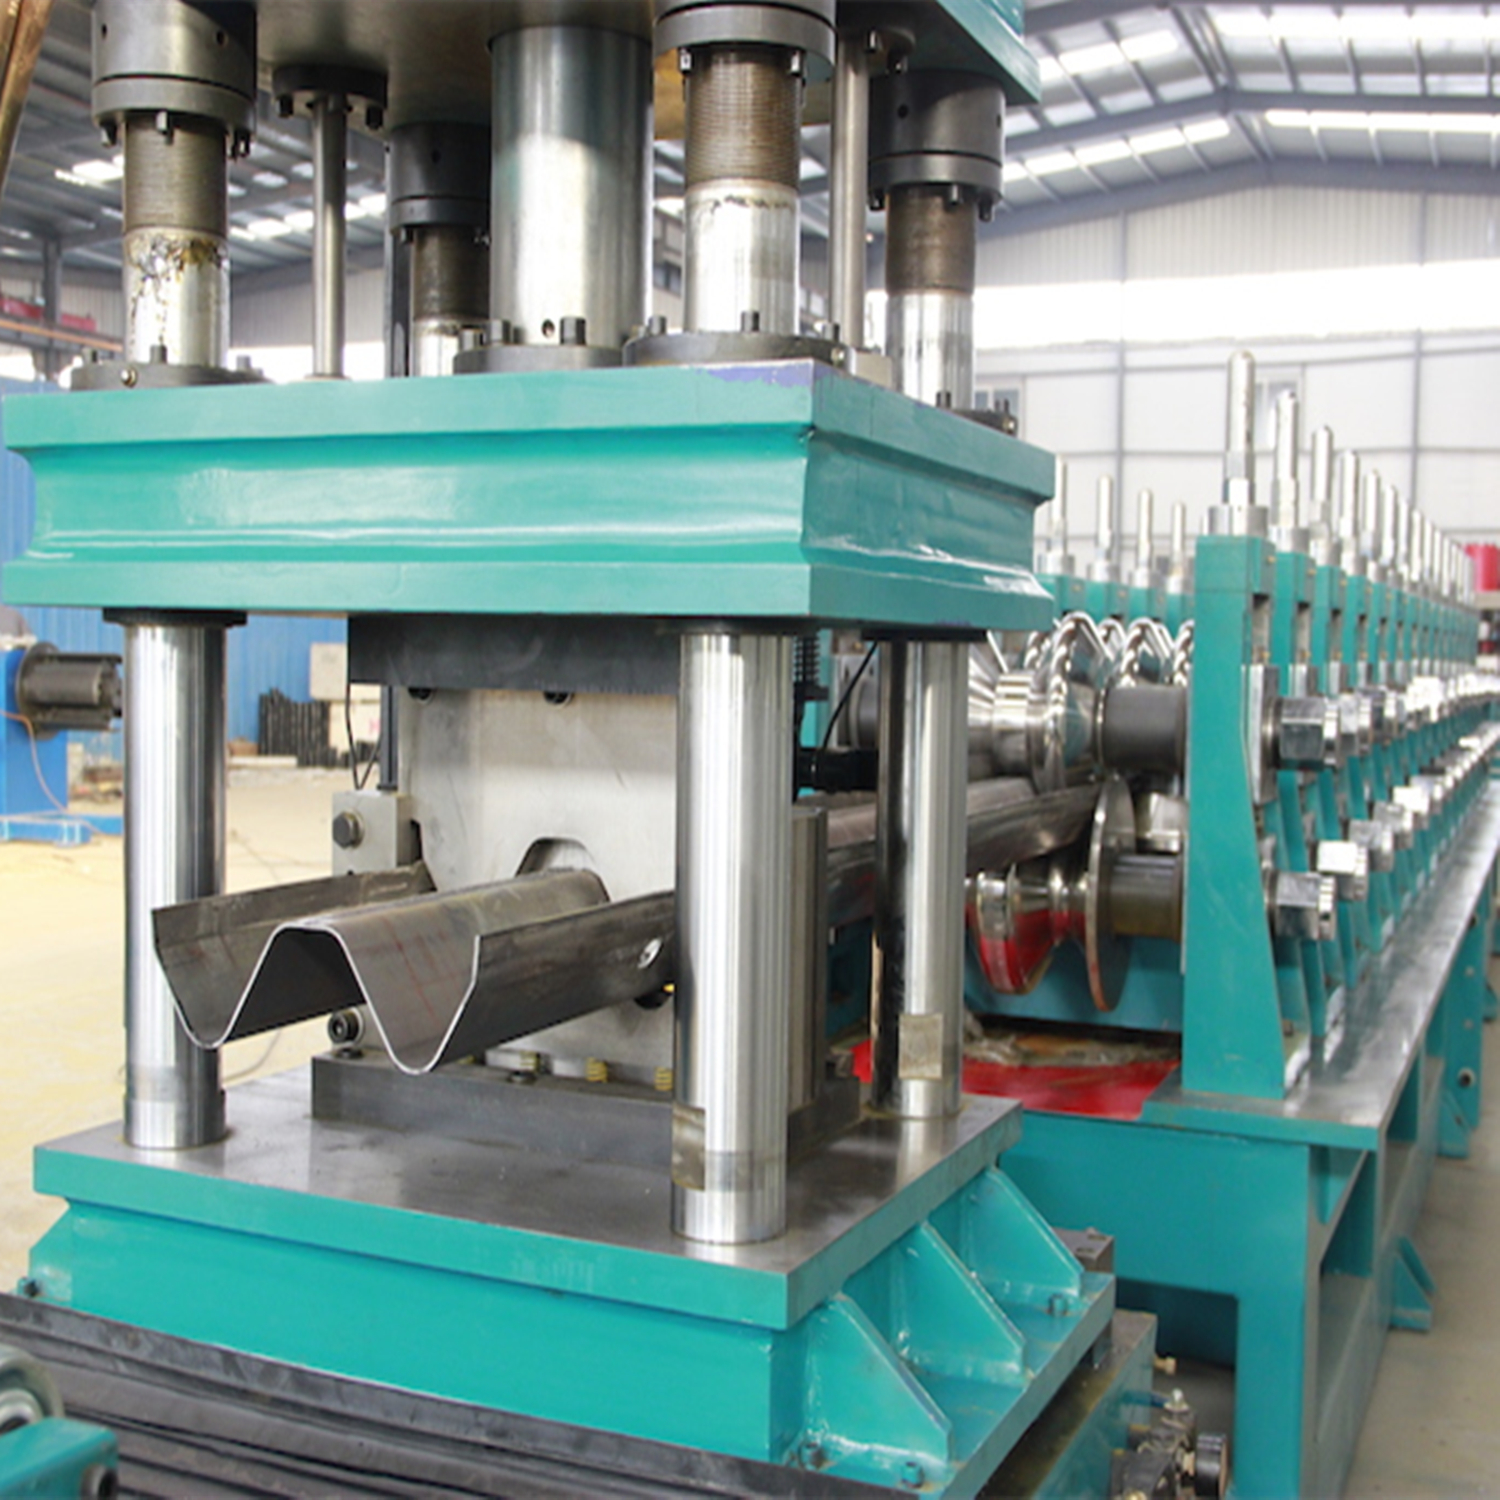 Highway Guardrail roll forming machine